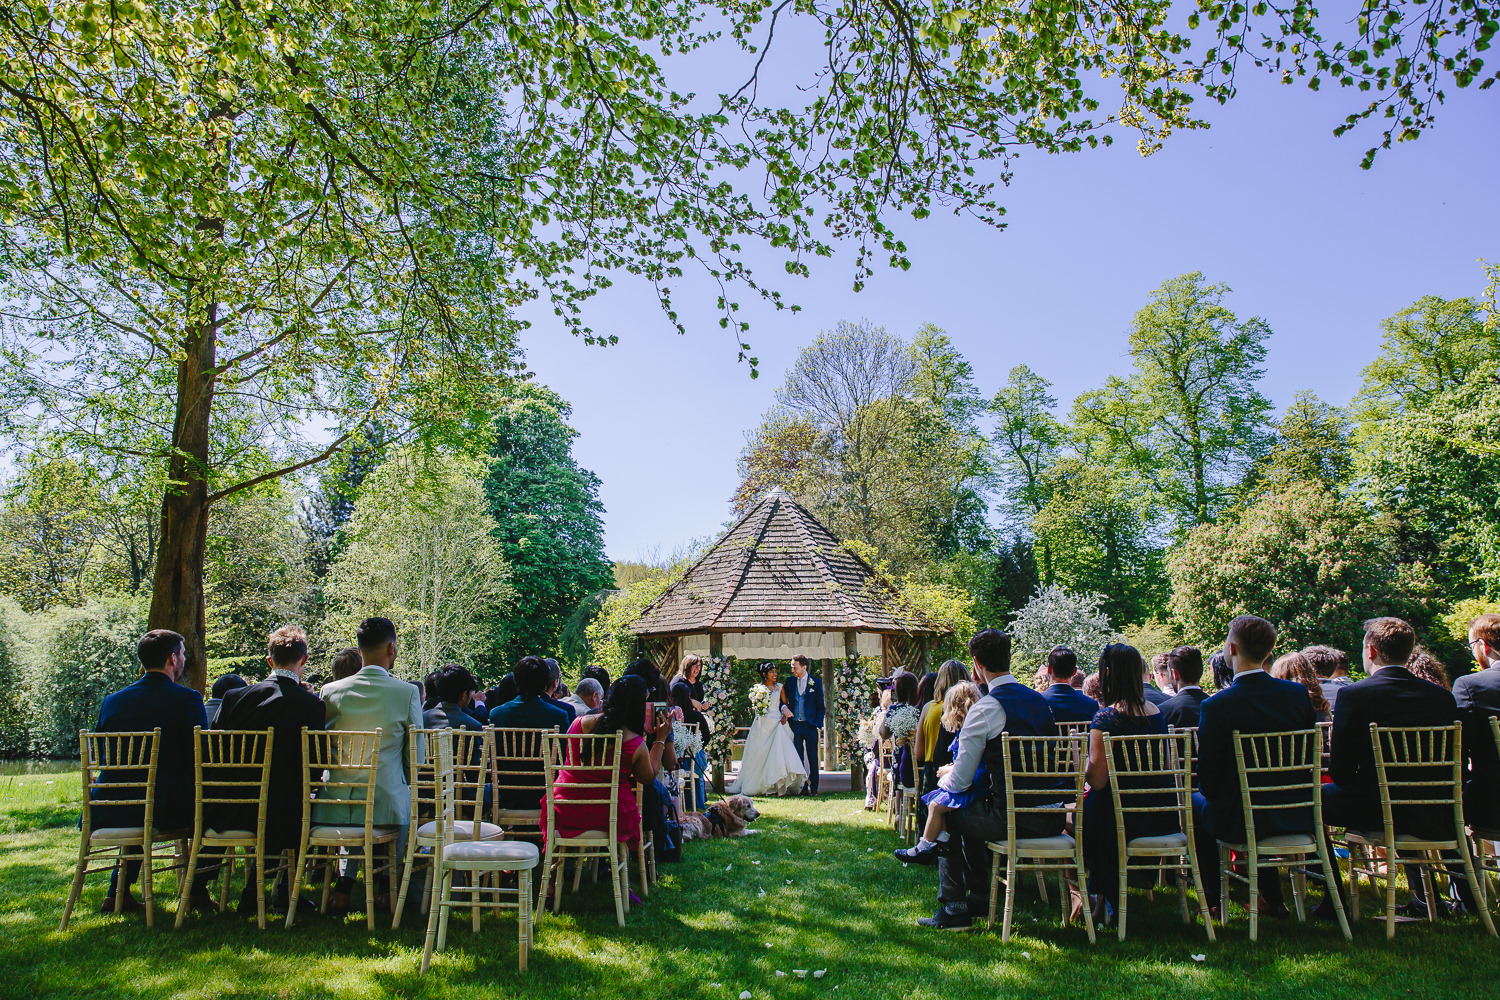 Bride and groom in outdoor ceremony gazebo at Chippenham park